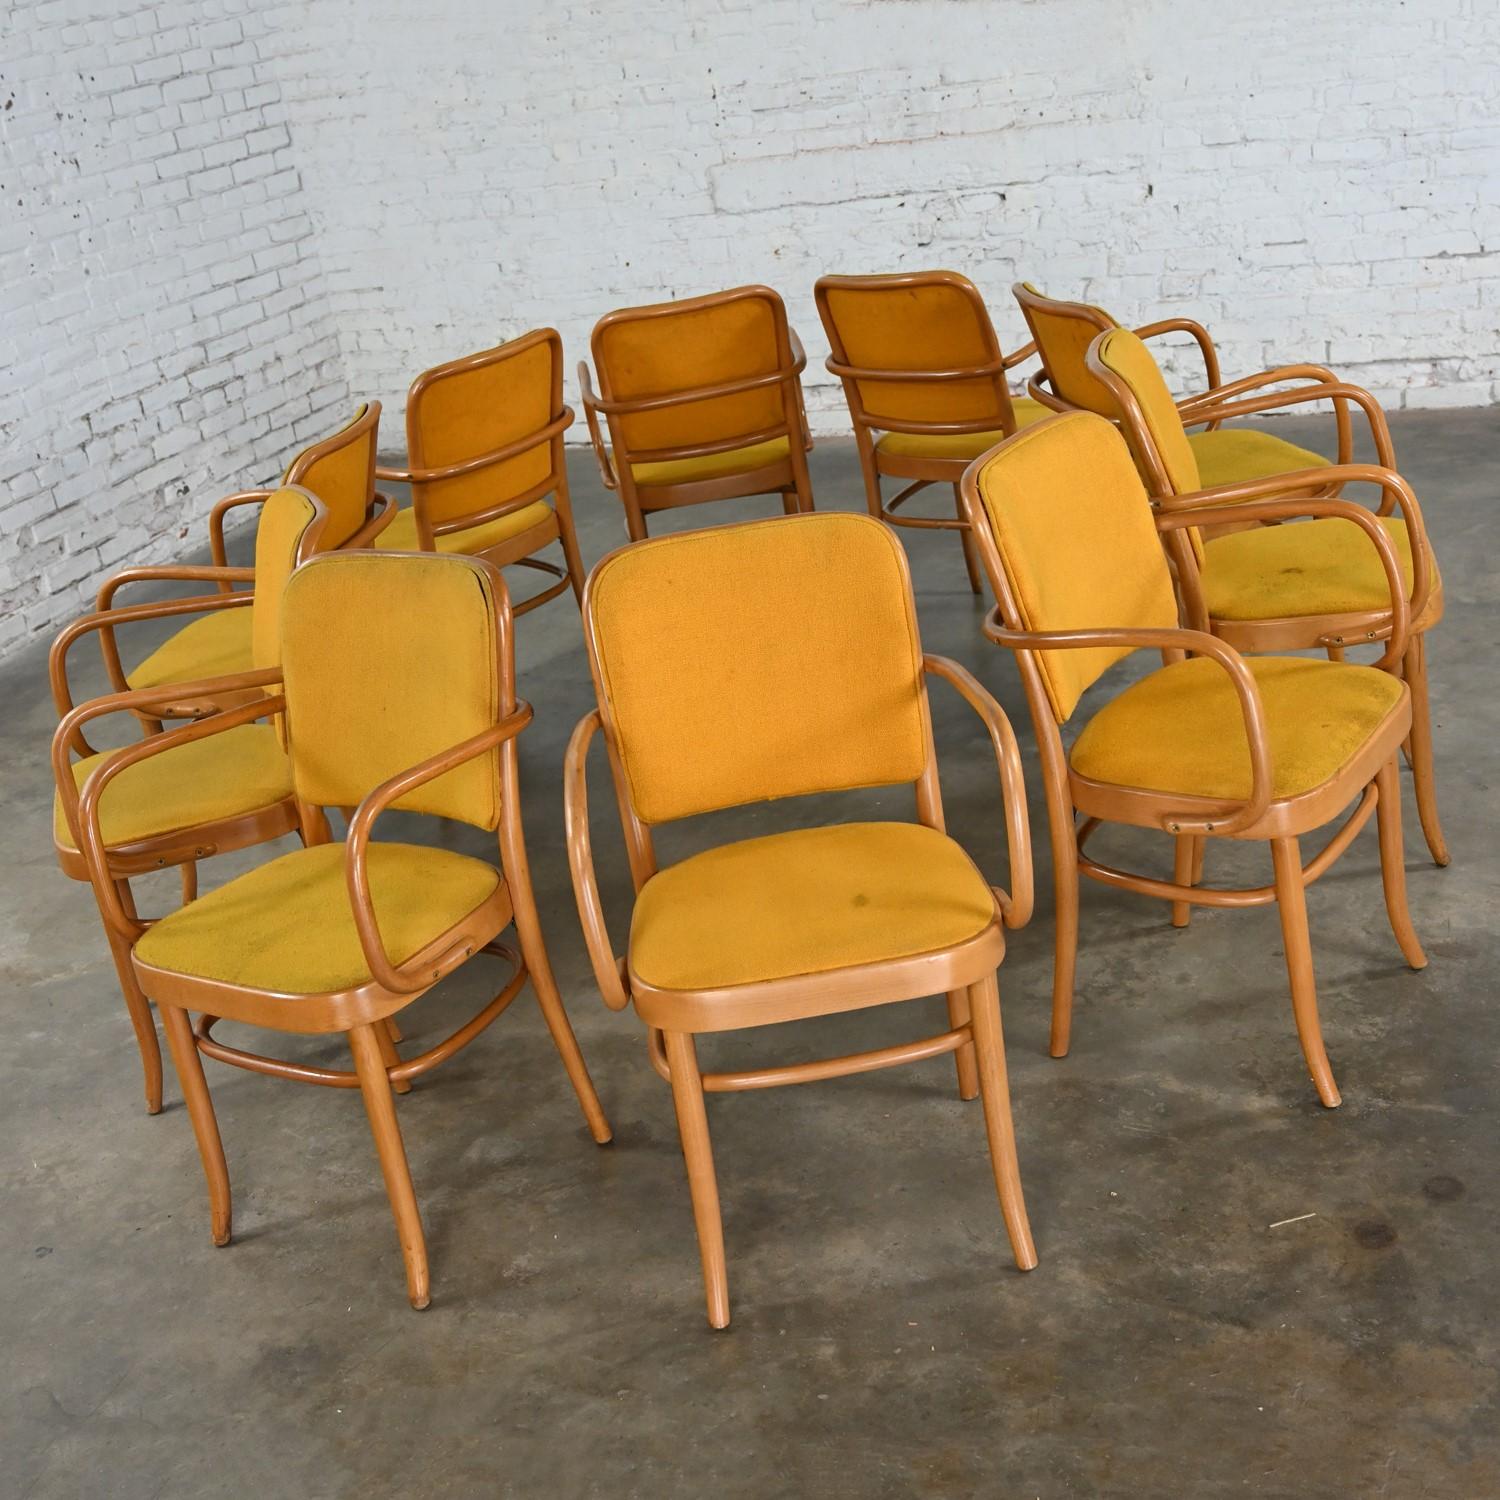 Wonderful vintage Bauhaus beech bentwood frame Thonet Josef Hoffman Prague 811 style armed dining chairs by Falcon Products Inc., Set of 10. Beautiful condition, keeping in mind that these are vintage and not new so will have signs of use and wear